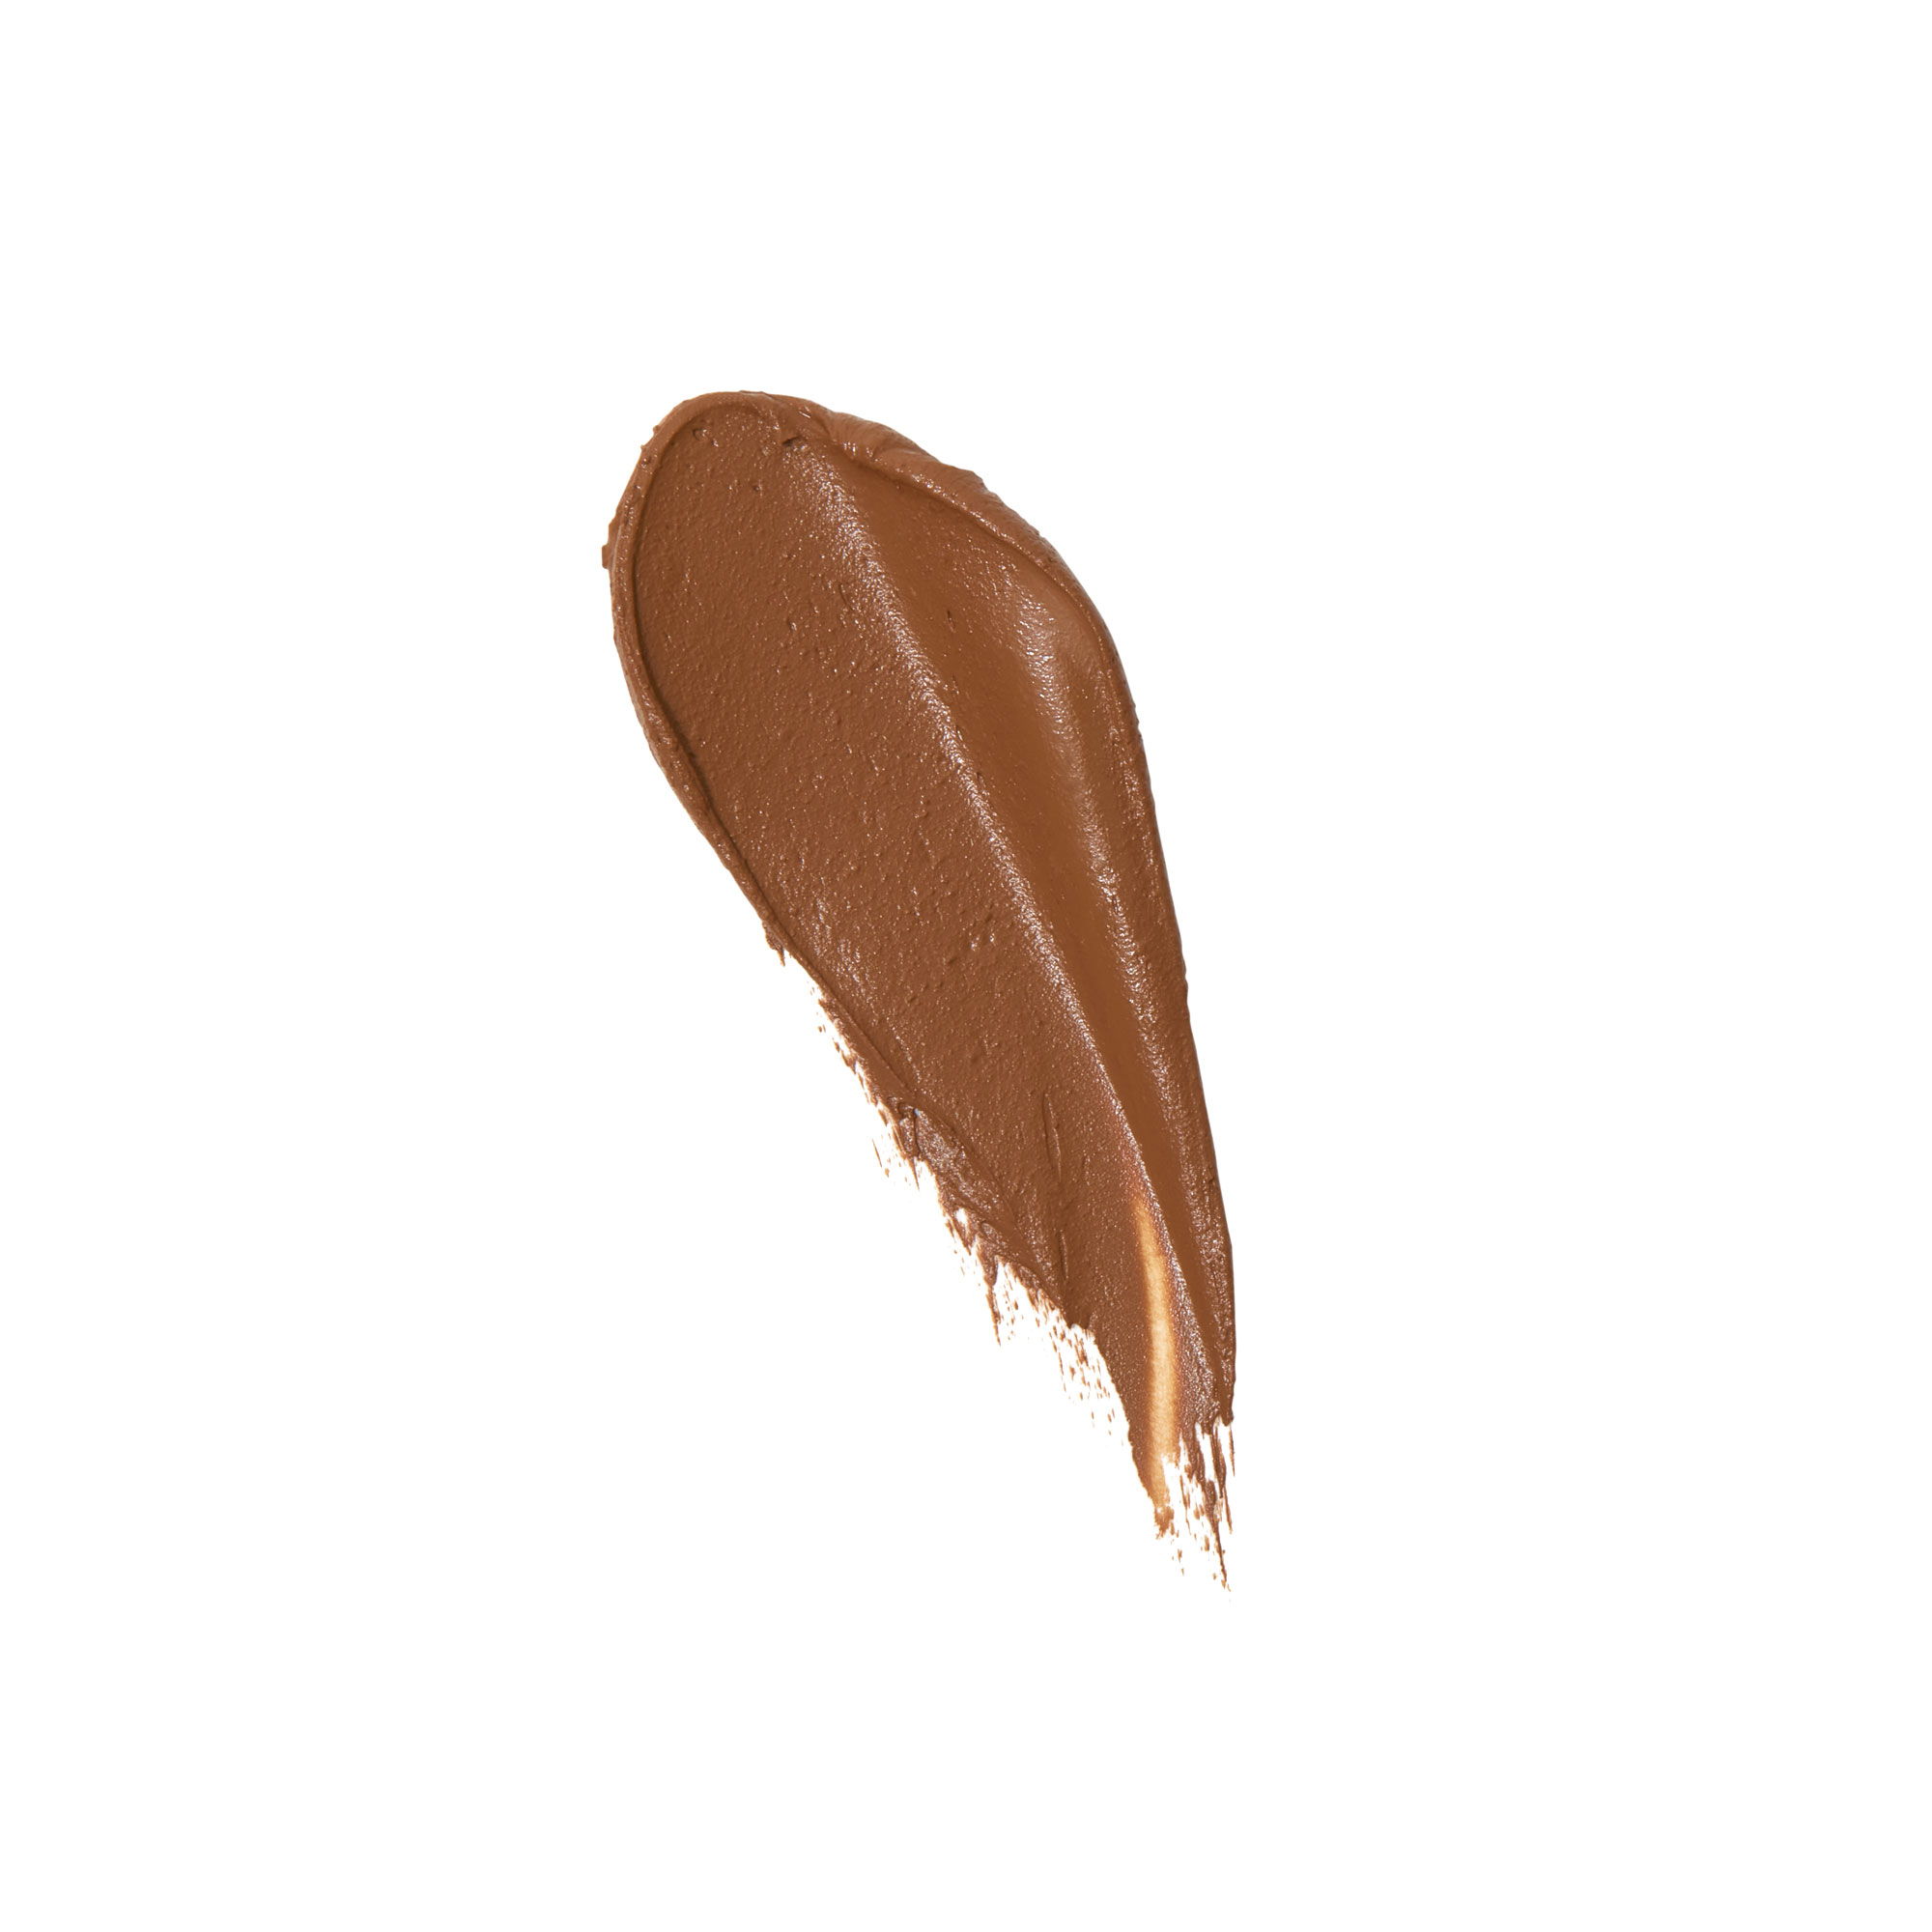 Benefit Cosmetics Boi-ing Industrial Strength Concealer, in Colour: 06 Deep Warm, Size: 3.0g